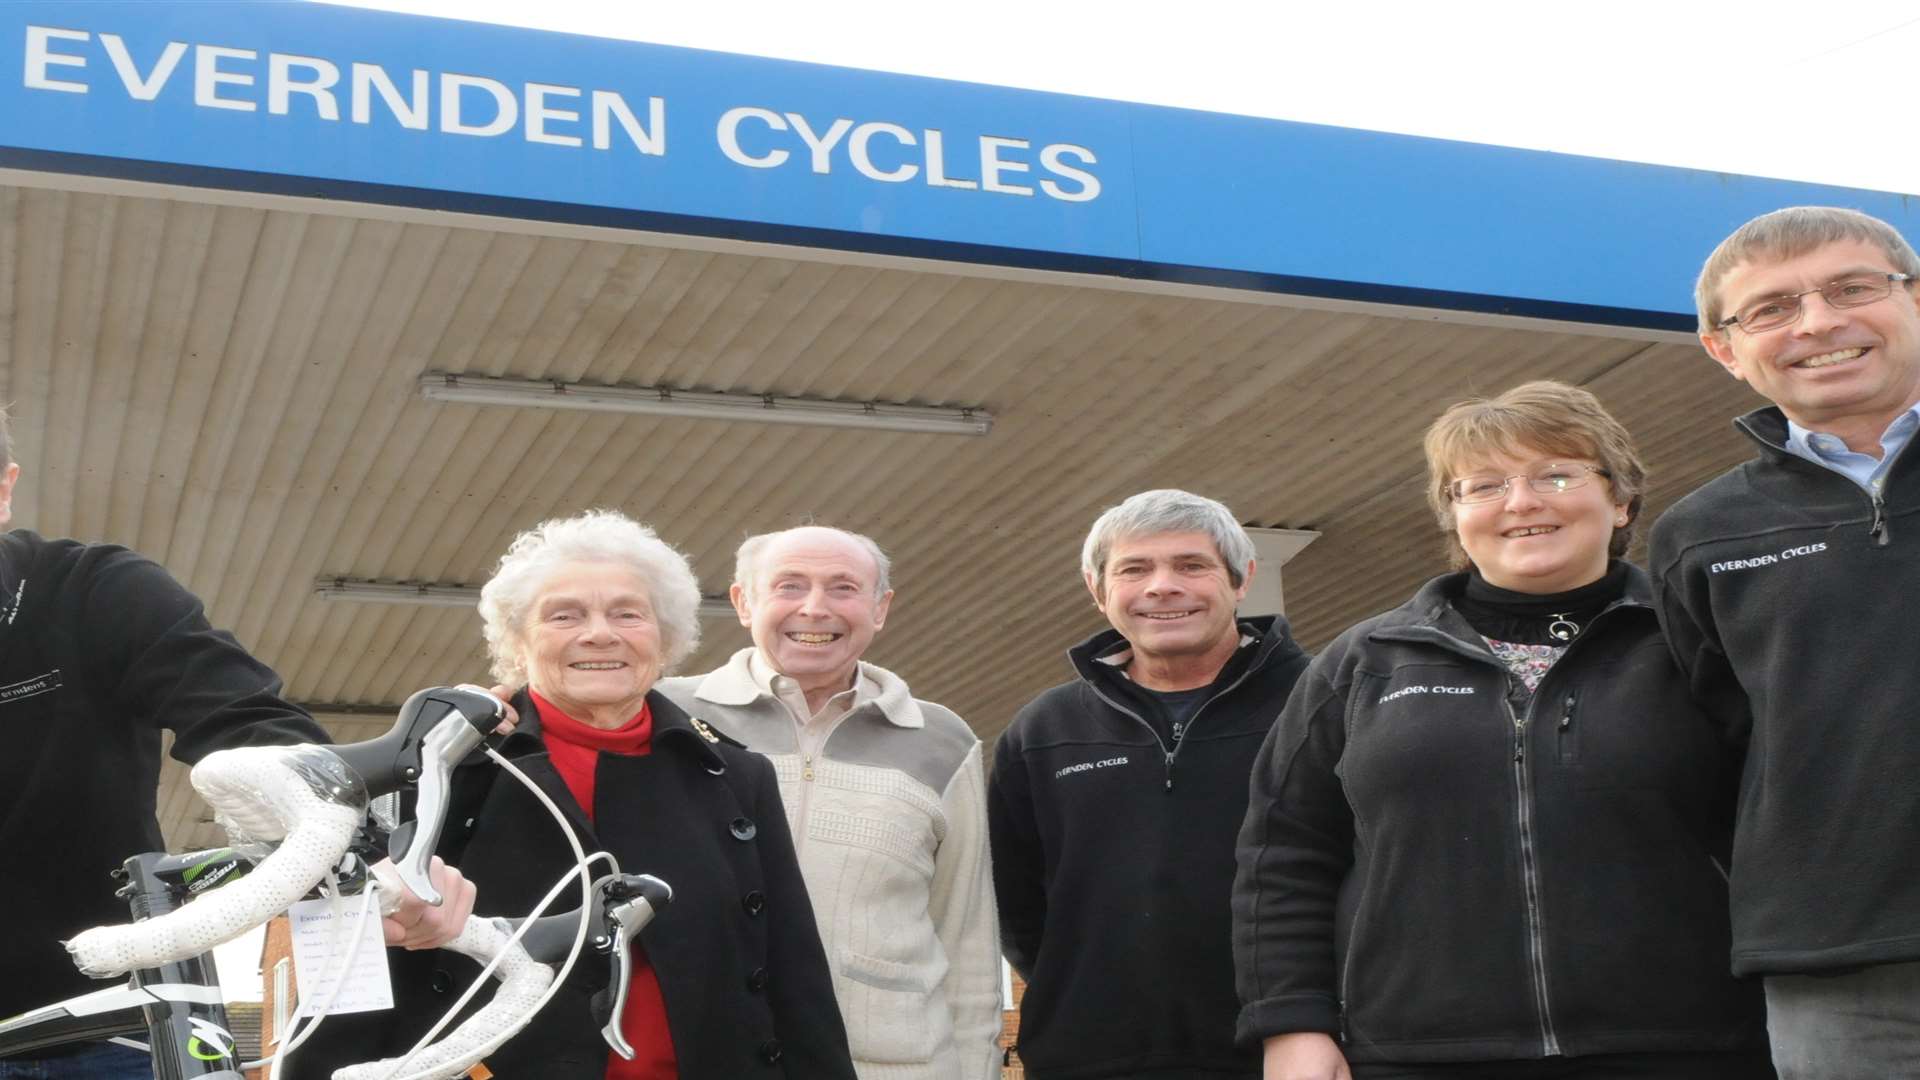 Evernden Cycles, is a family business which has been in Paddock Wood for decades. Pictured right: Karen and Tony Evernden